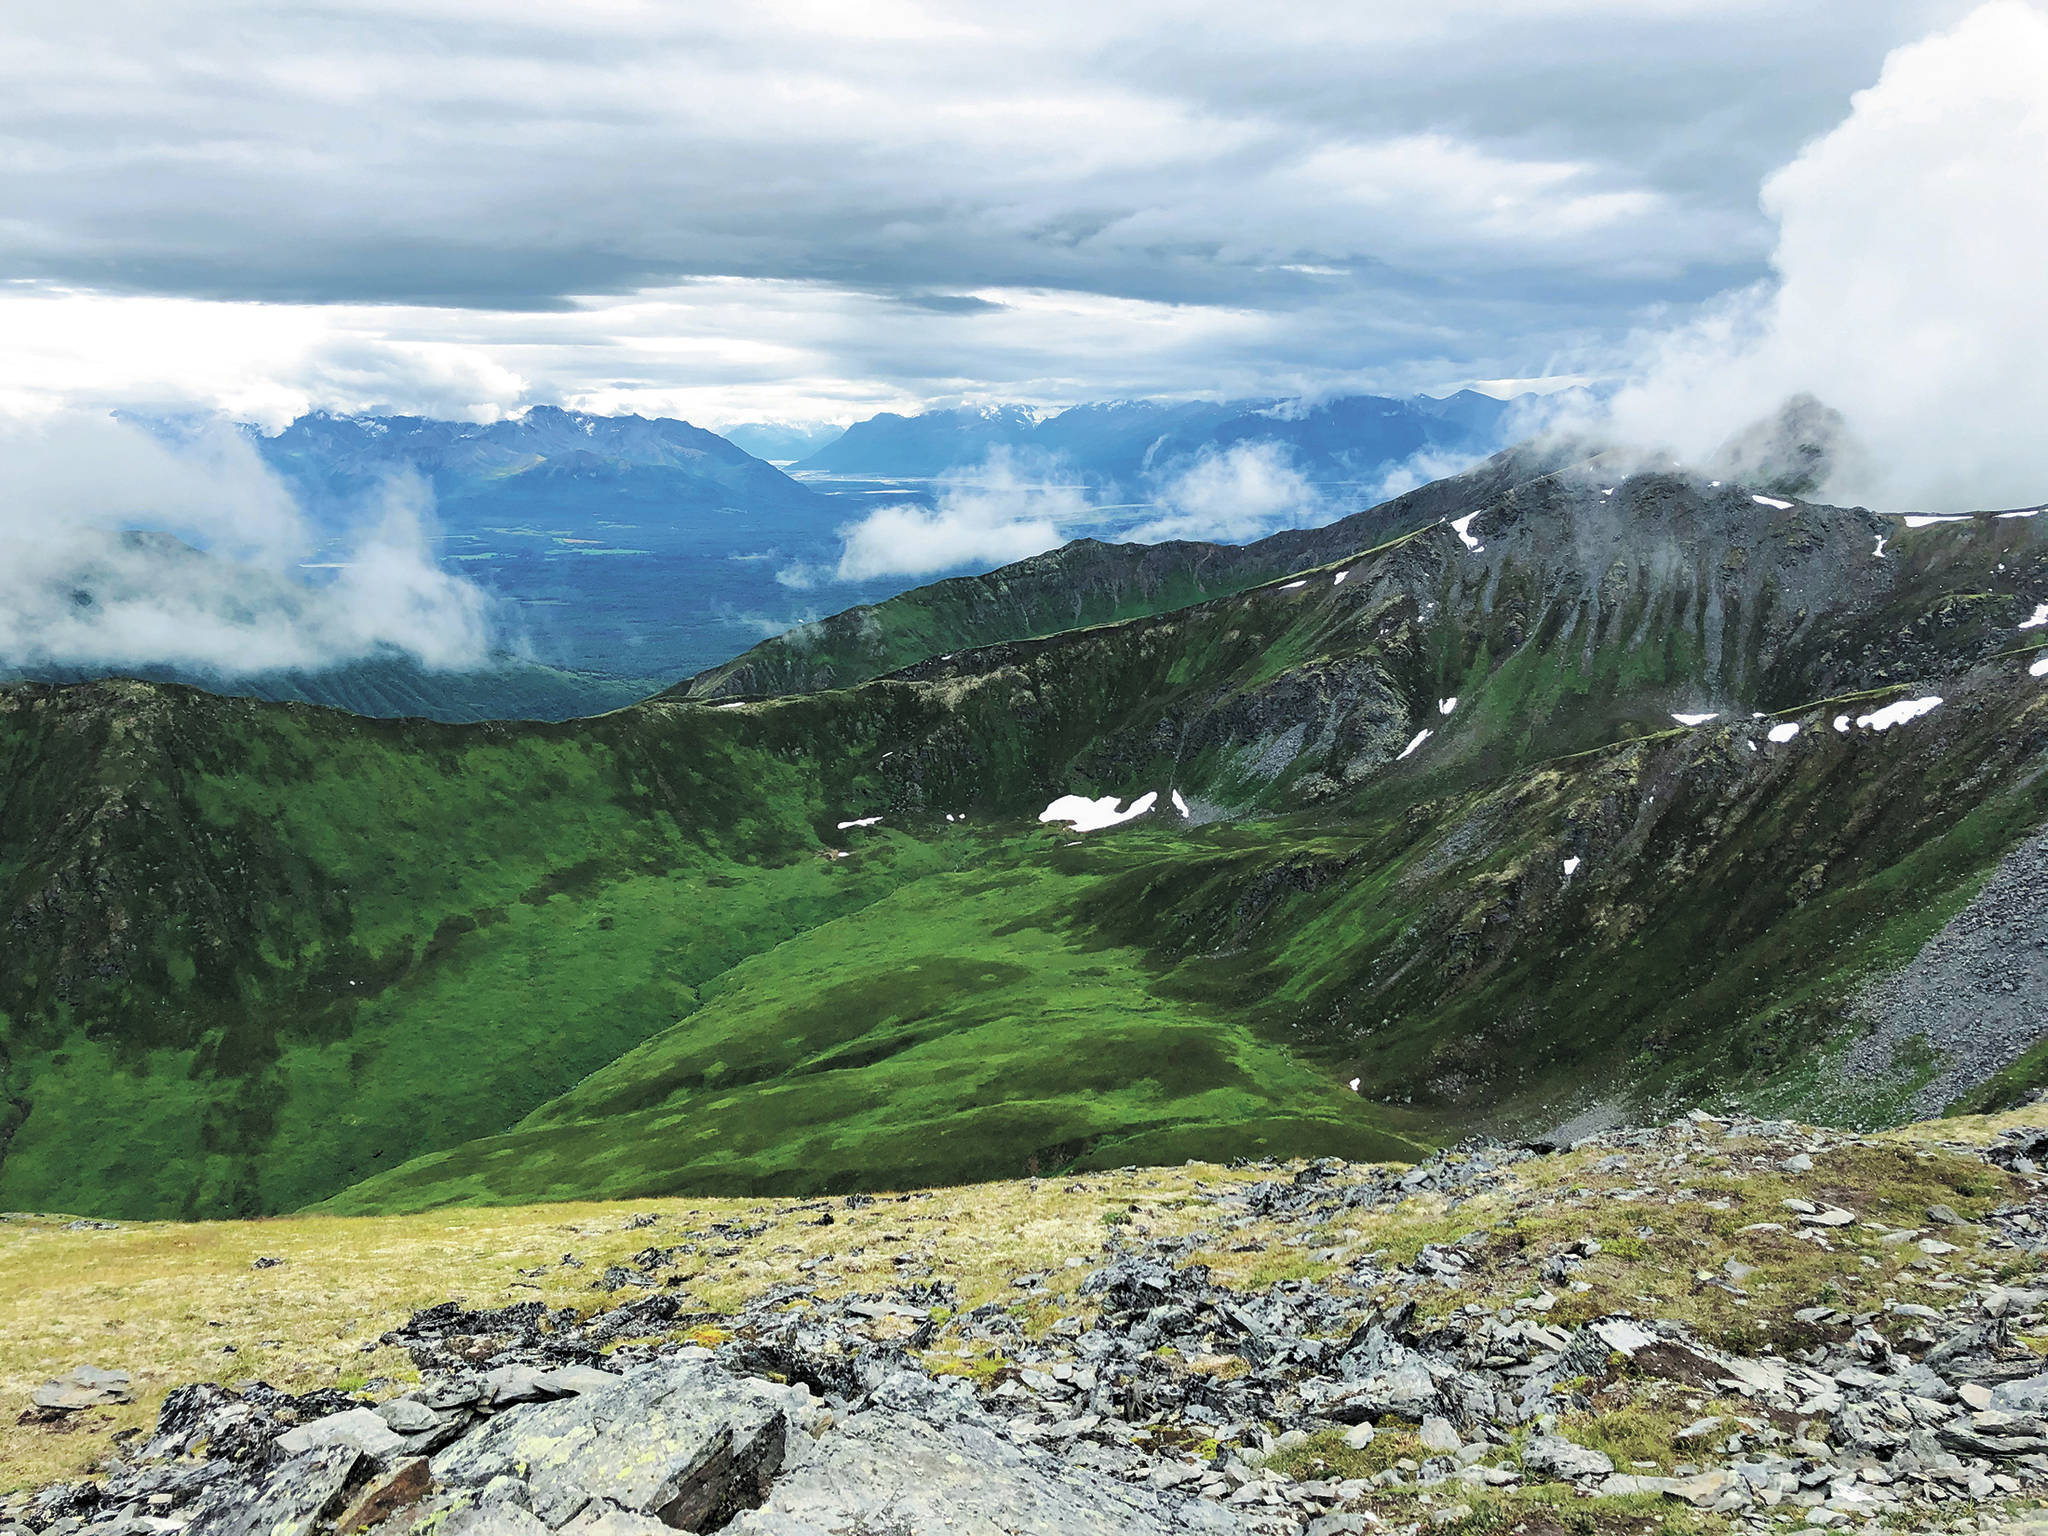 The climb up April Bowl provides expansive views, seen here Aug. 3, 2020 in Hatcher Pass, Alaska. (Photo by Megan Pacer/Homer News)